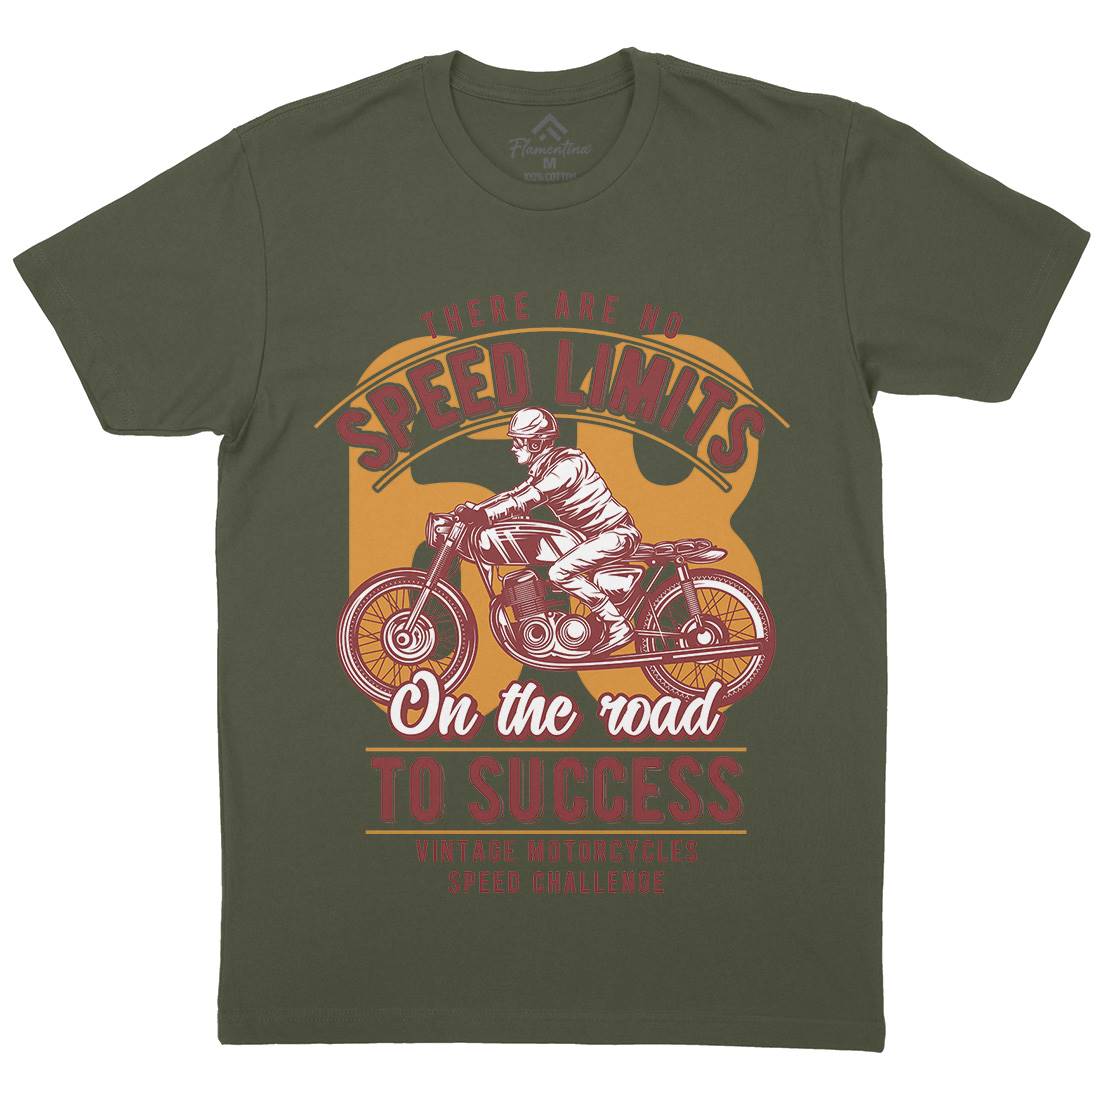 Speed Limits Mens Crew Neck T-Shirt Motorcycles B858